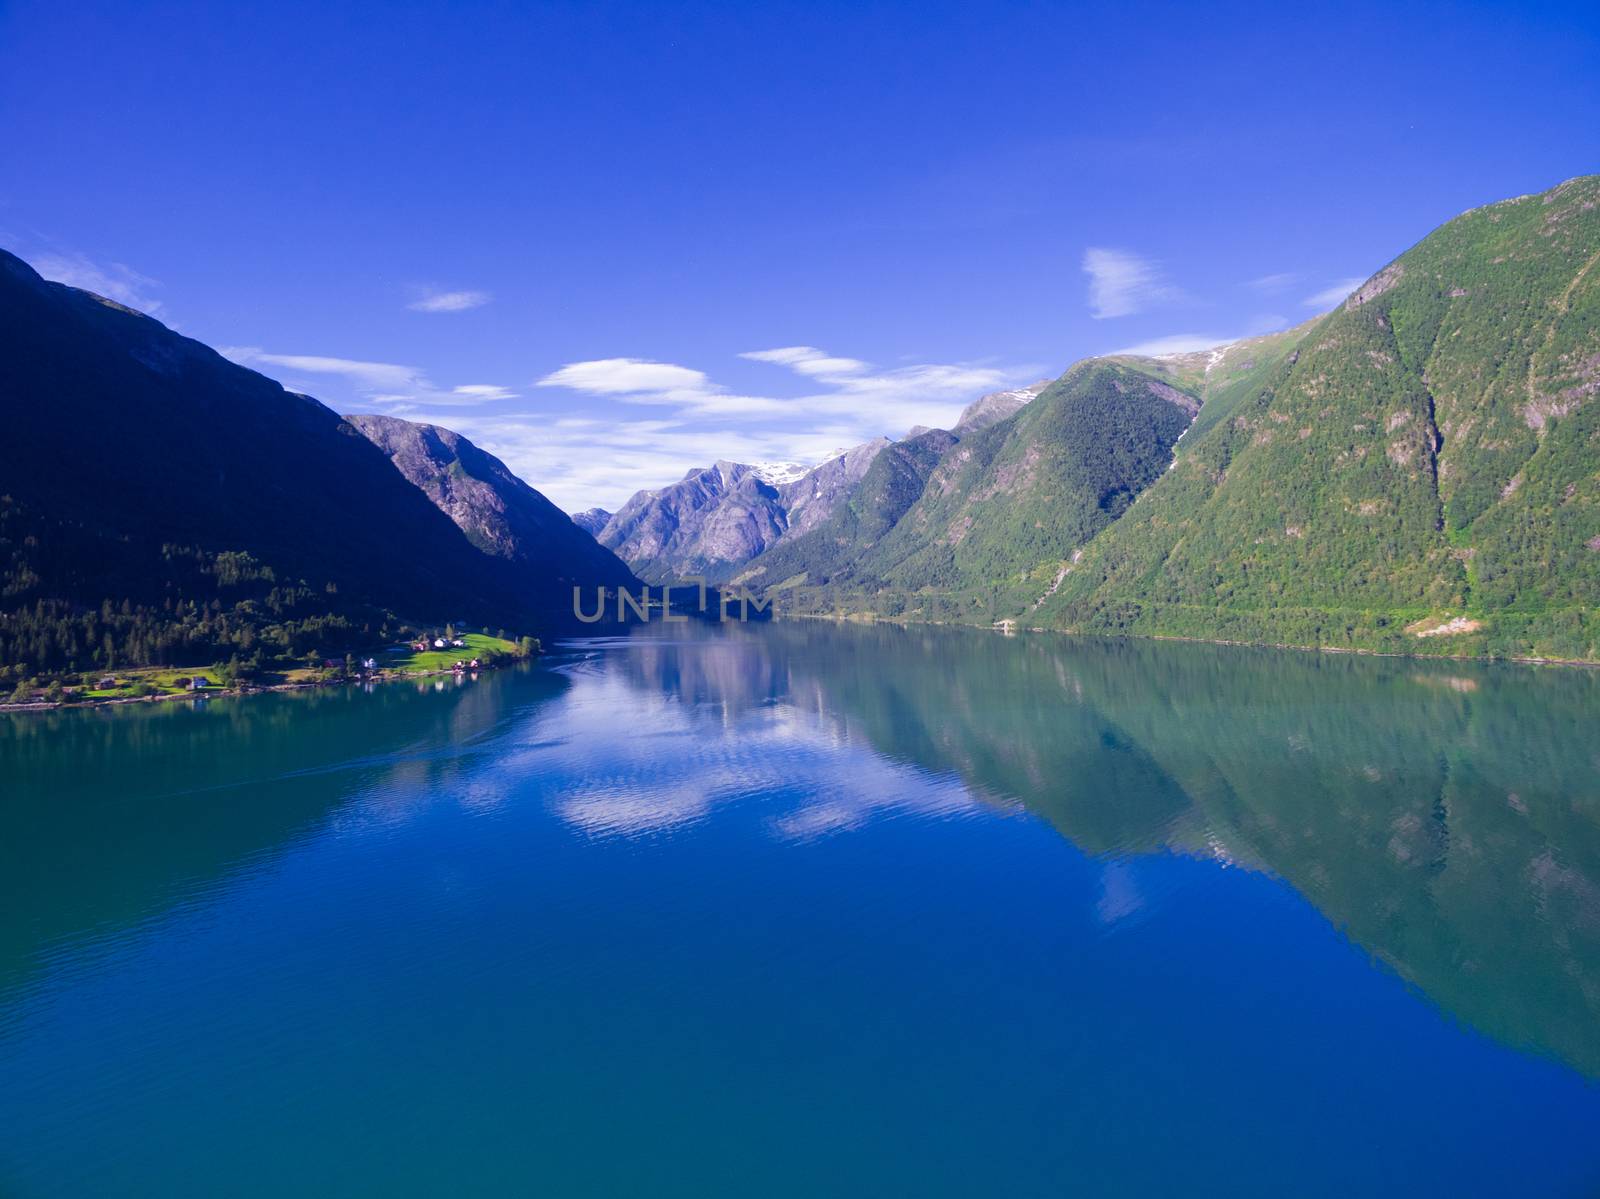 Scenic view of typical norwegian landscape - fjord Sognefjorden surrounded by mountains